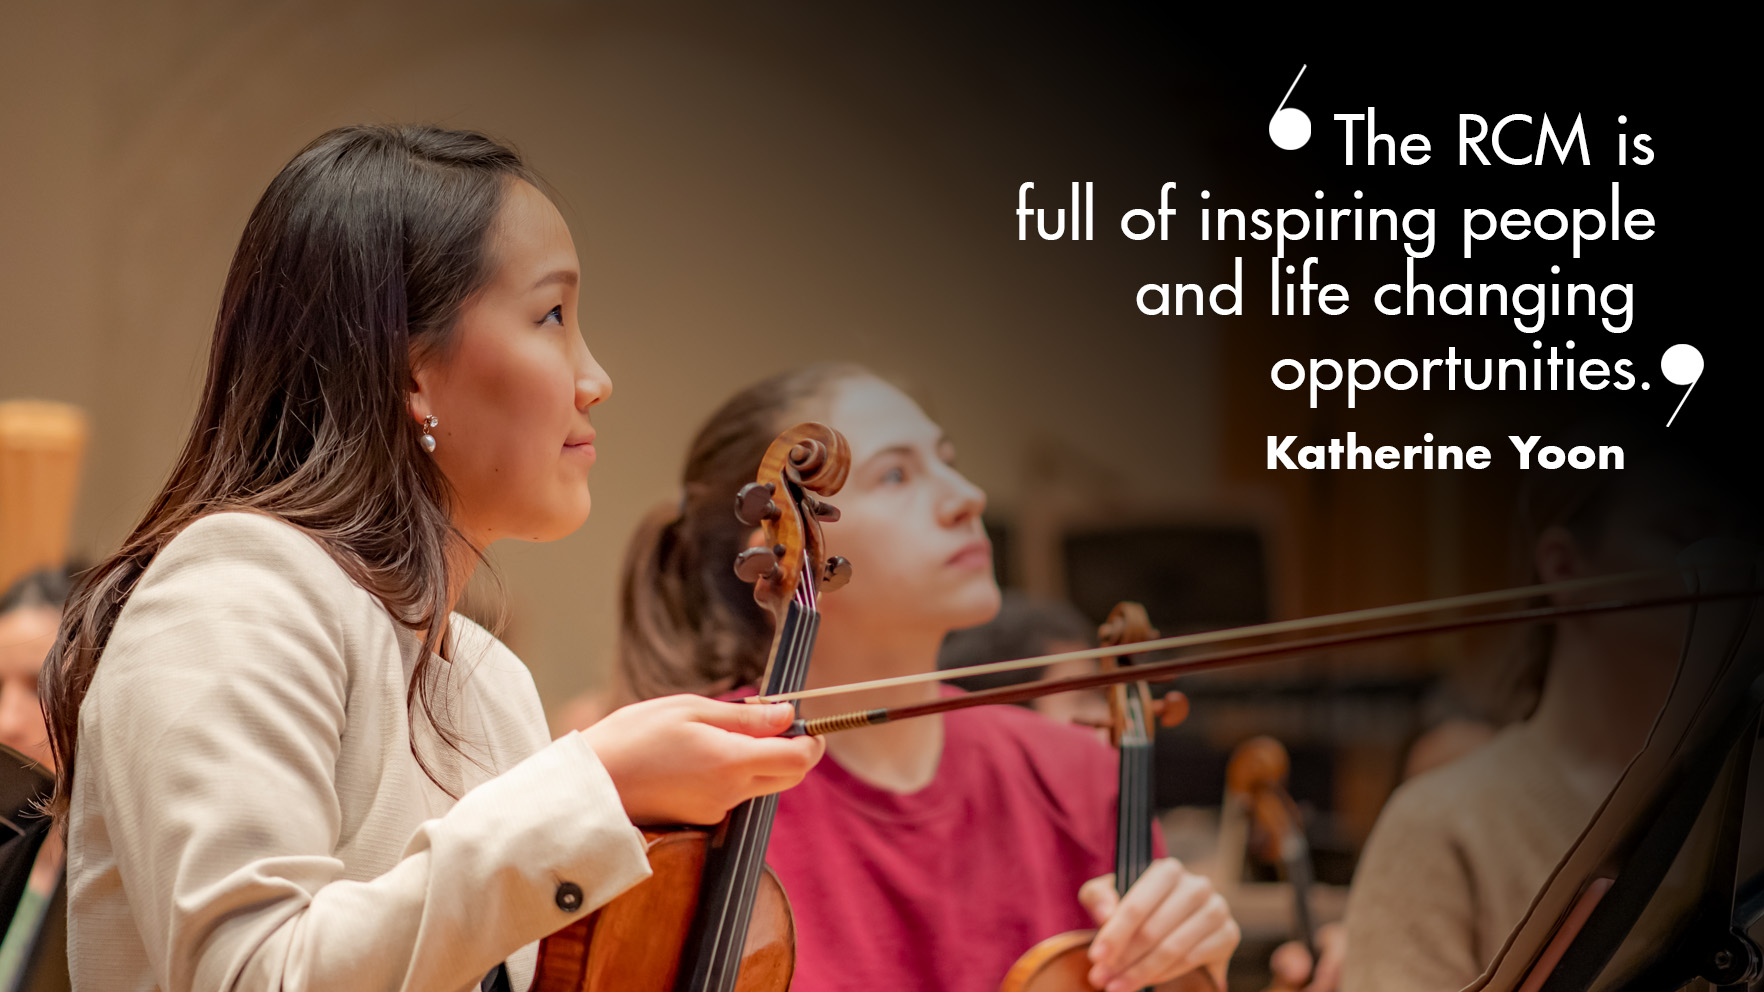 “The RCM is an incredible place, full of inspiring people and life changing opportunities". A female student, wearing a white jacket, sitting in an orchestral rehearsal, holding her bow and violin.